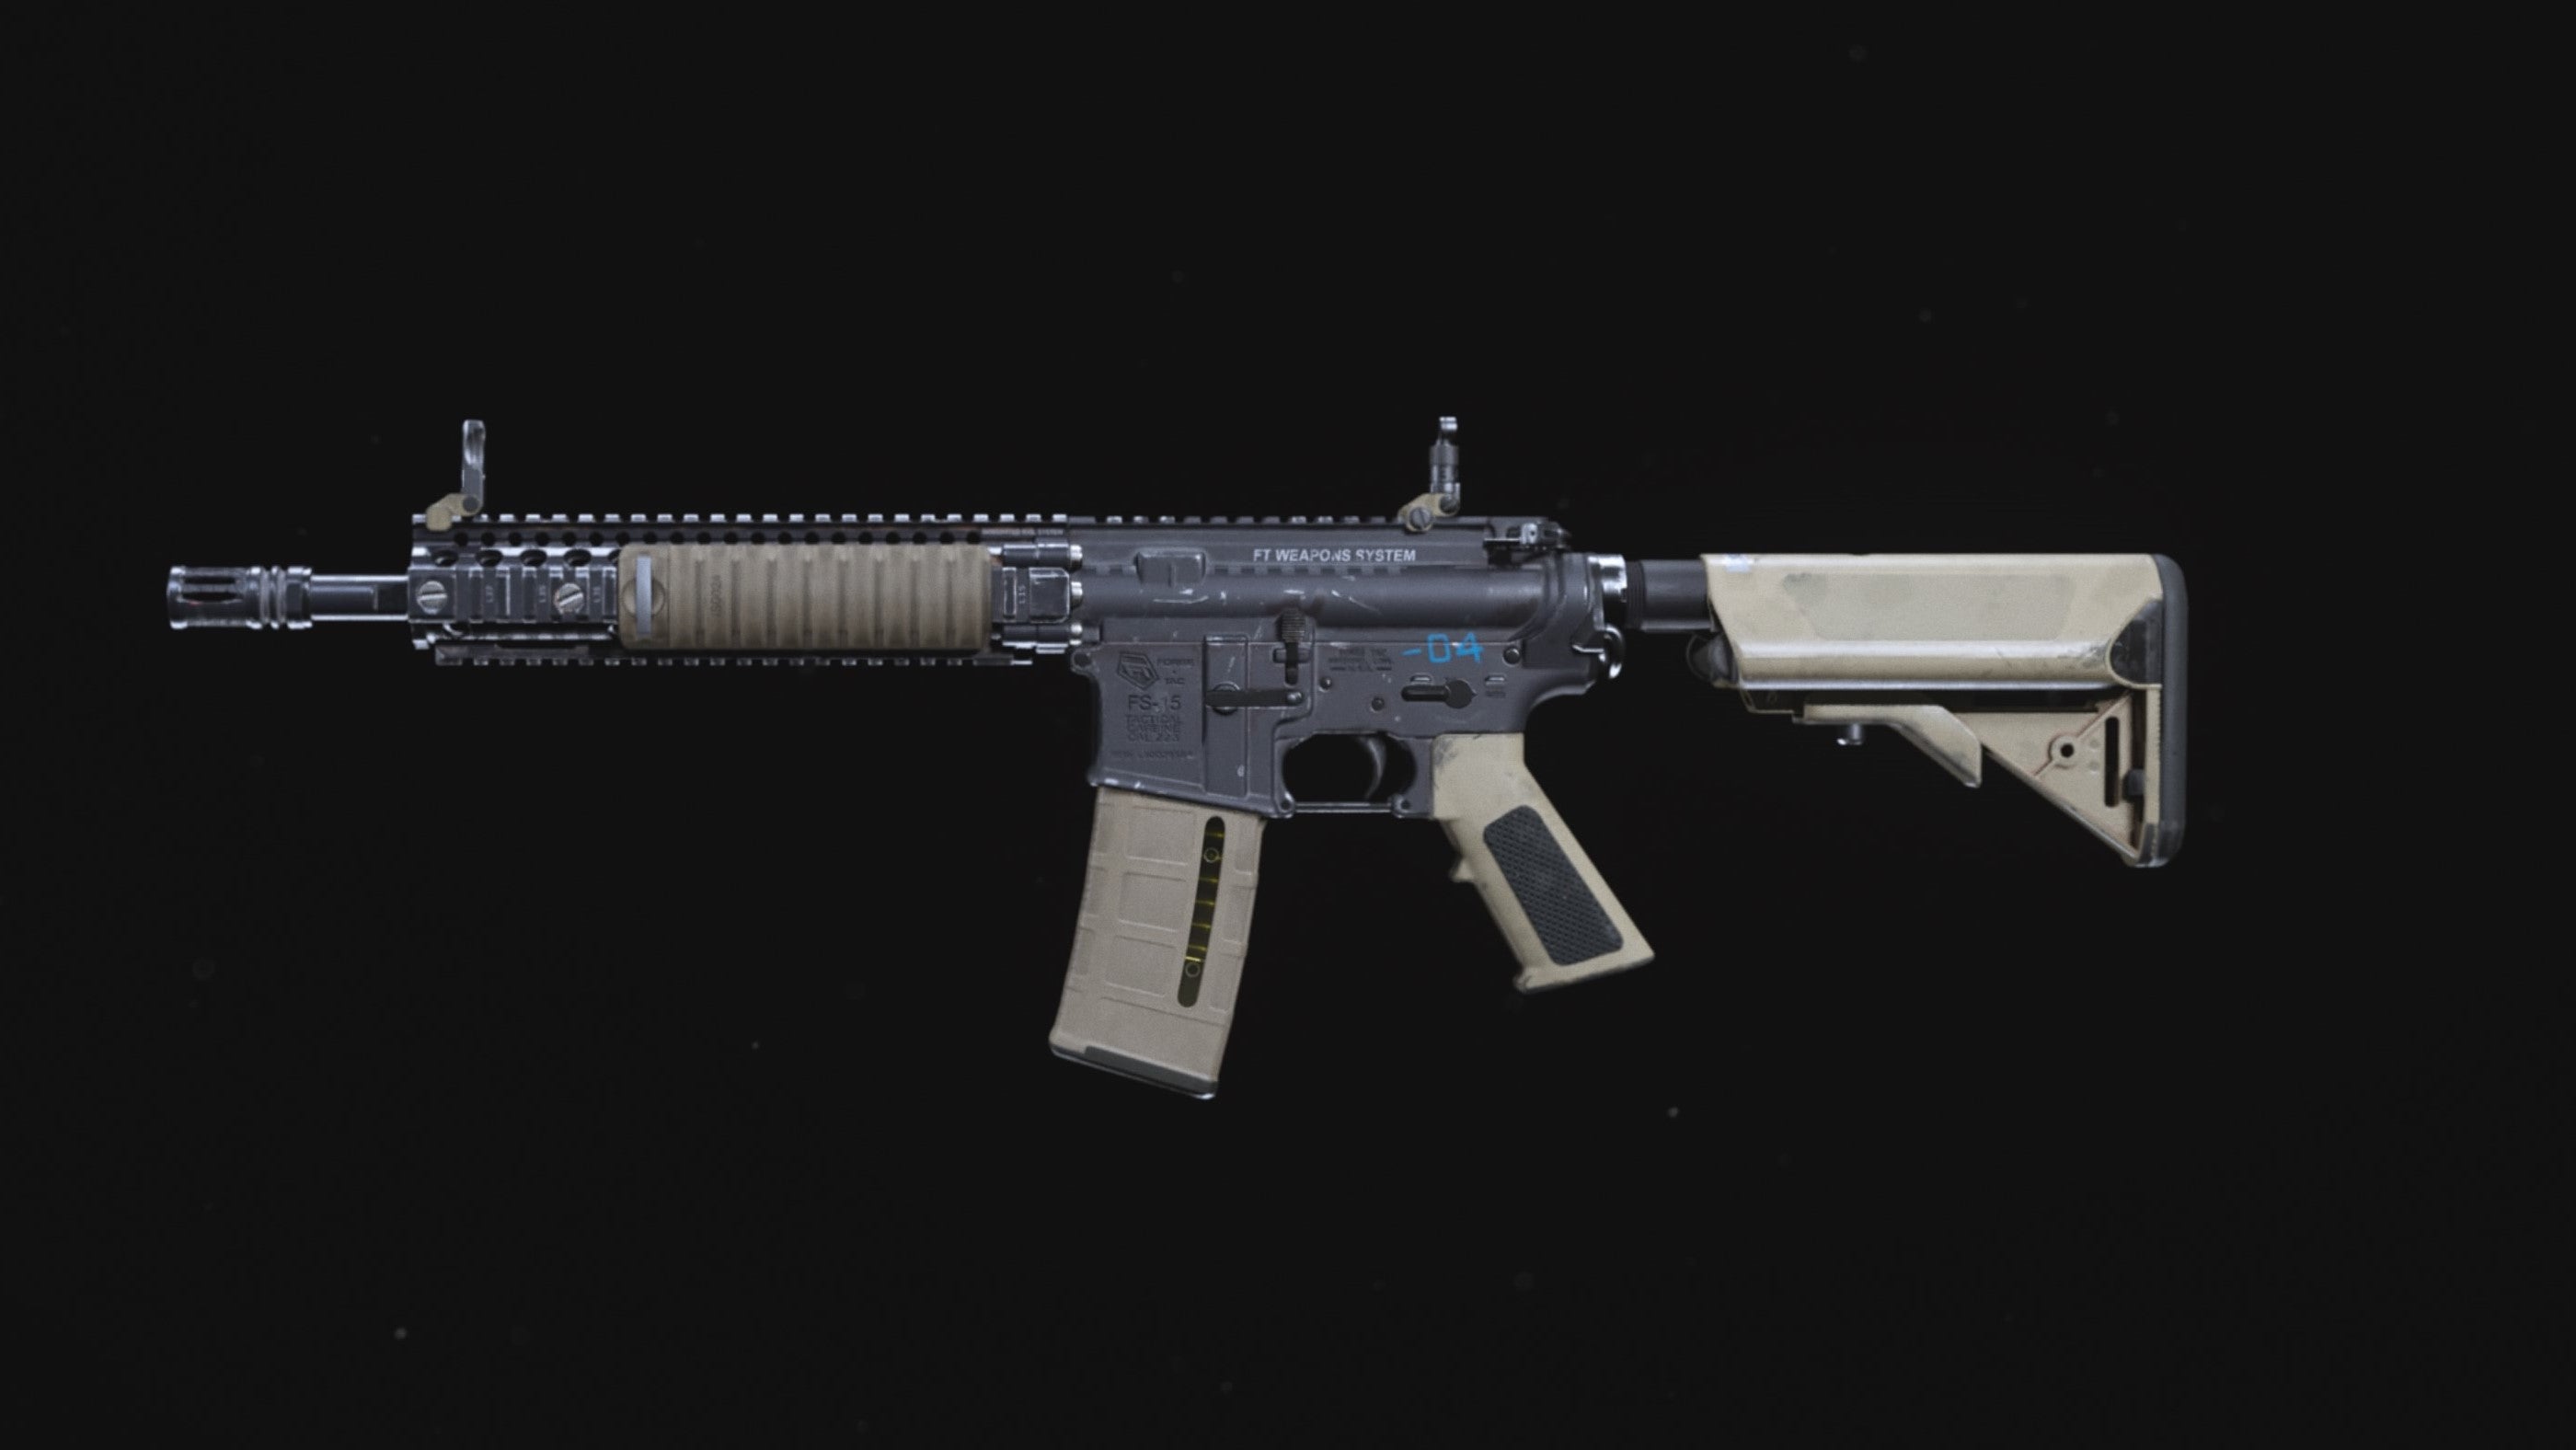 The M4A1 in Call of Duty: Warzone